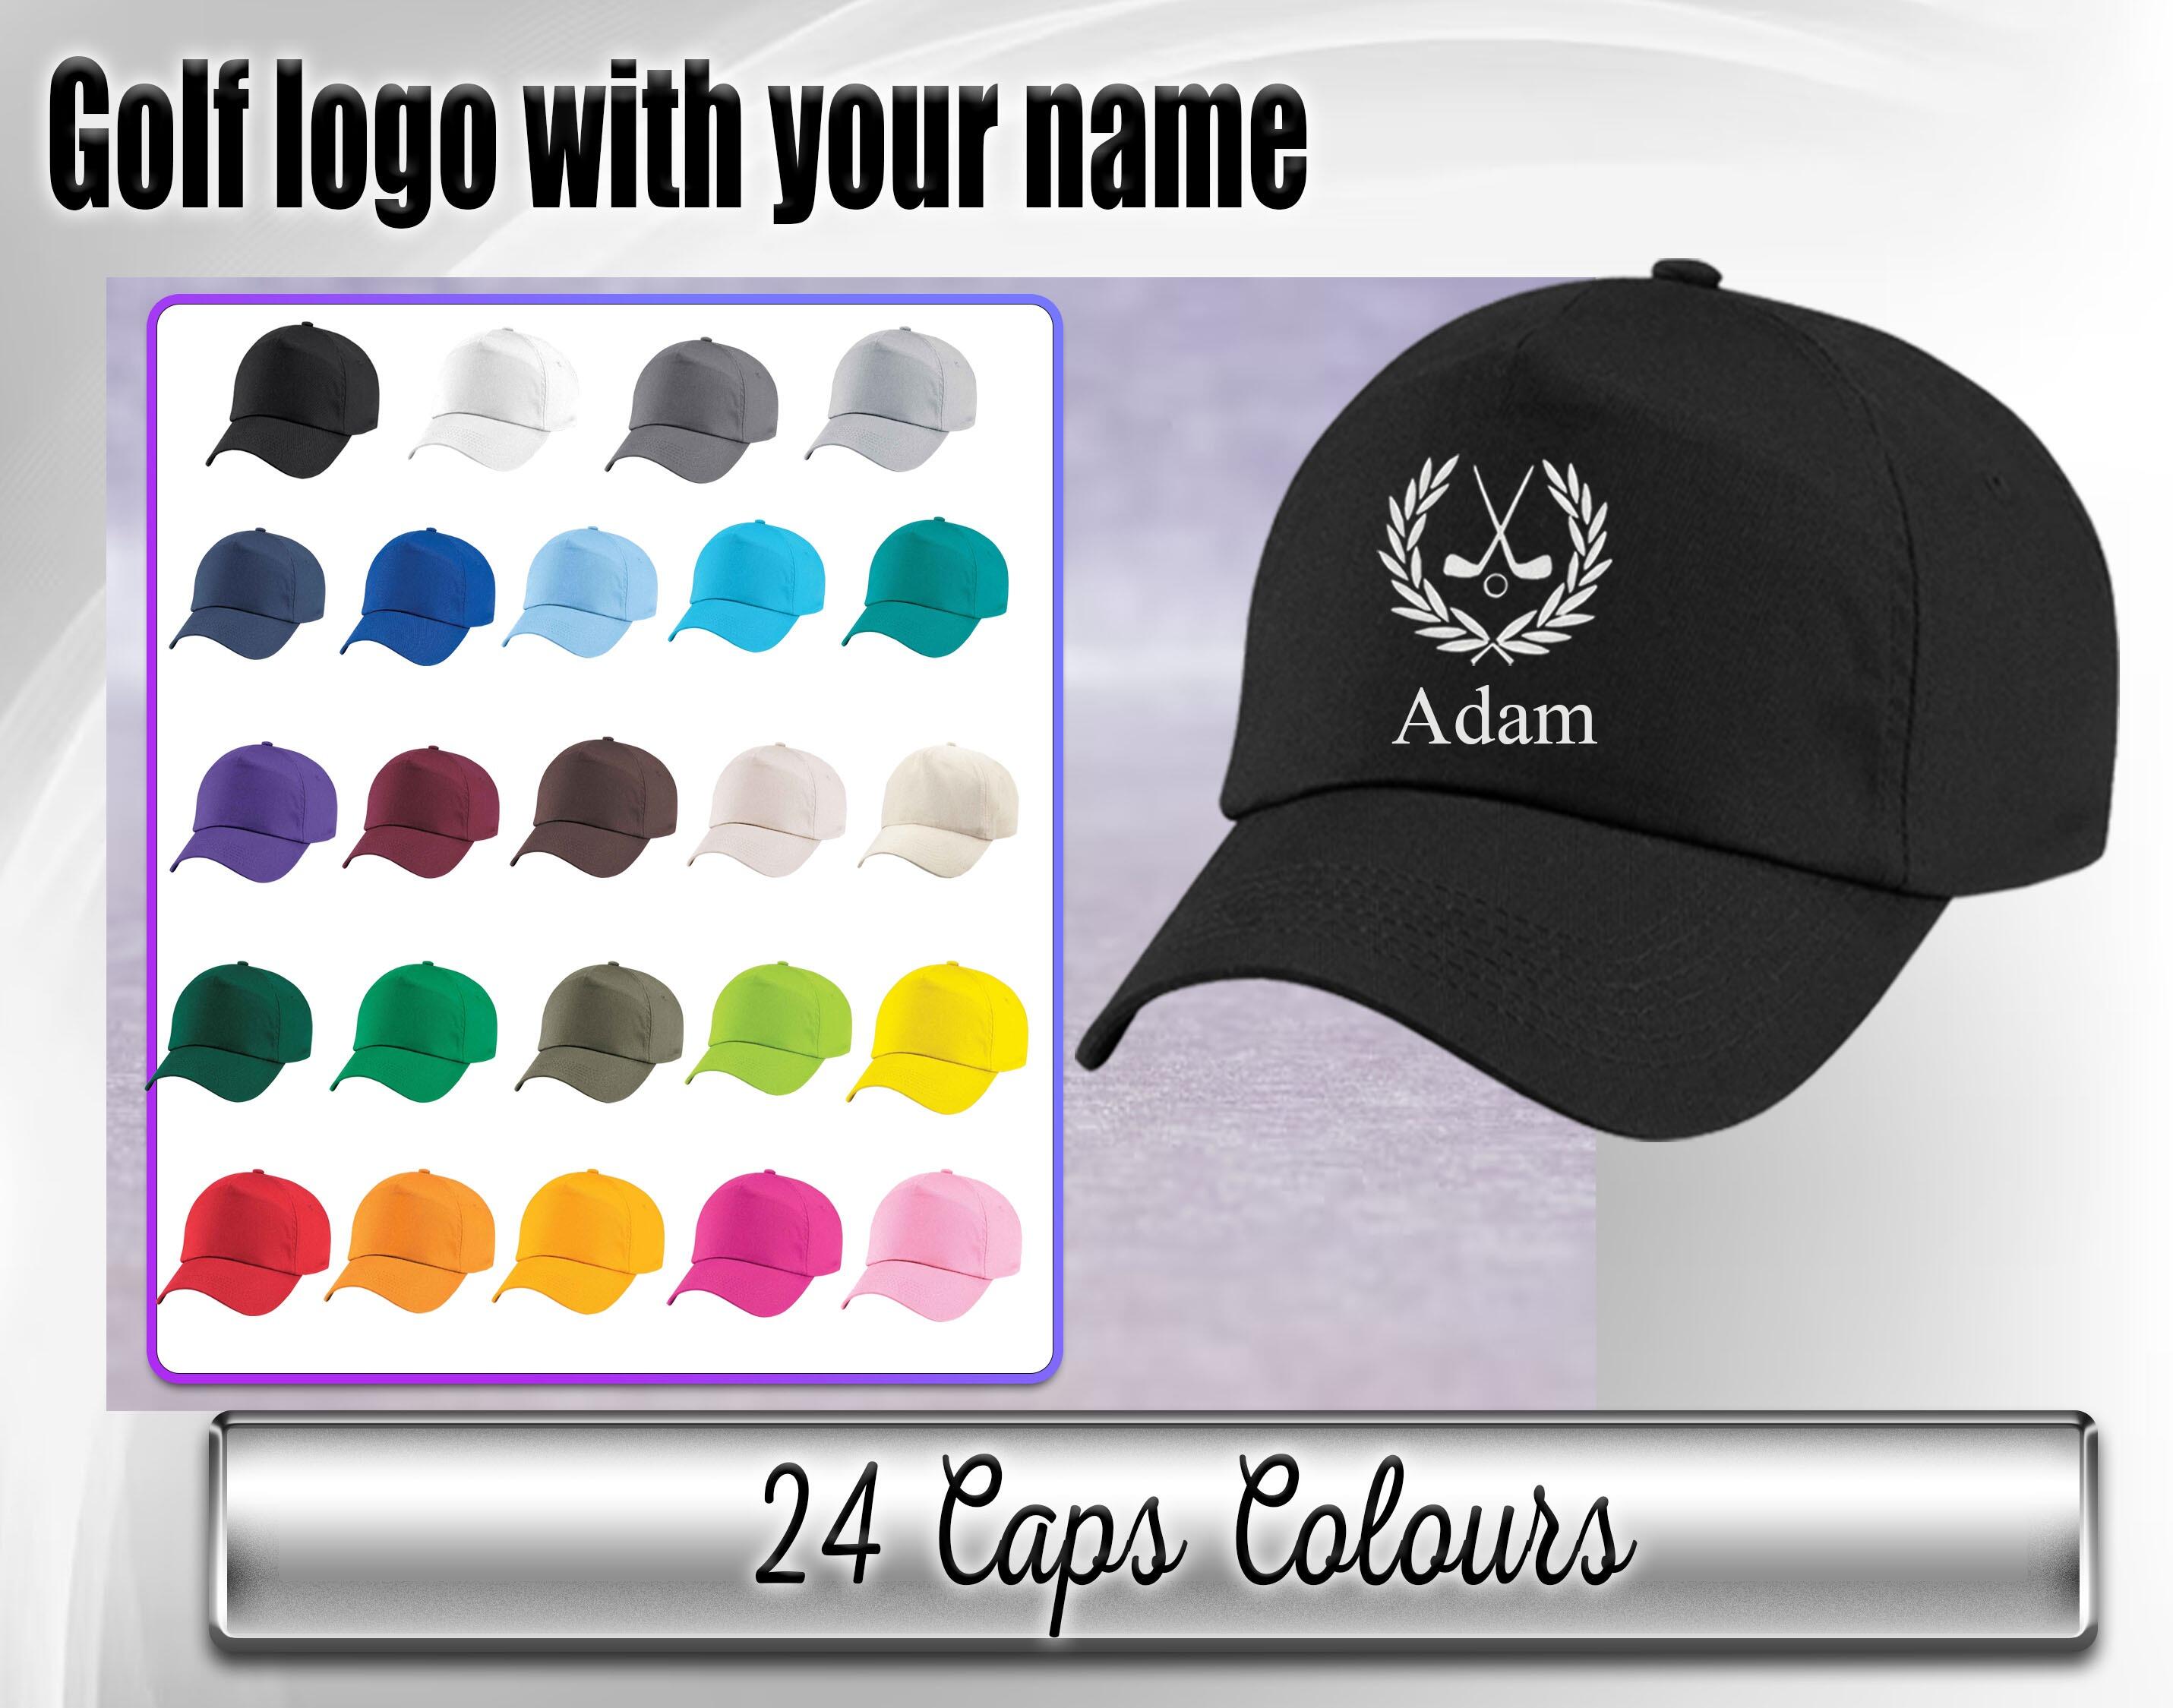 Personalised embroidered golf cap